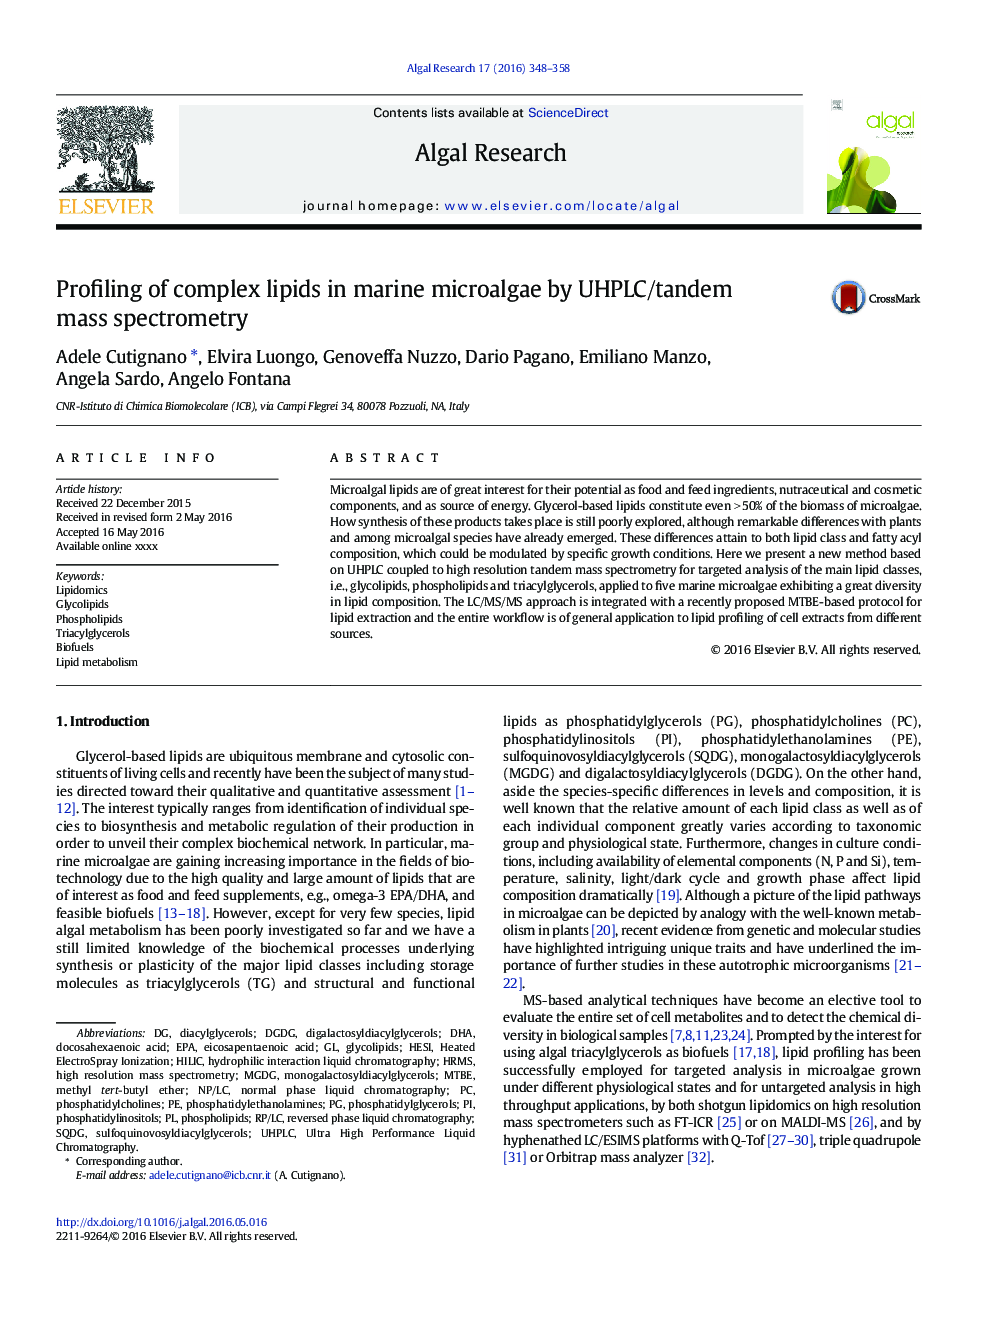 Profiling of complex lipids in marine microalgae by UHPLC/tandem mass spectrometry